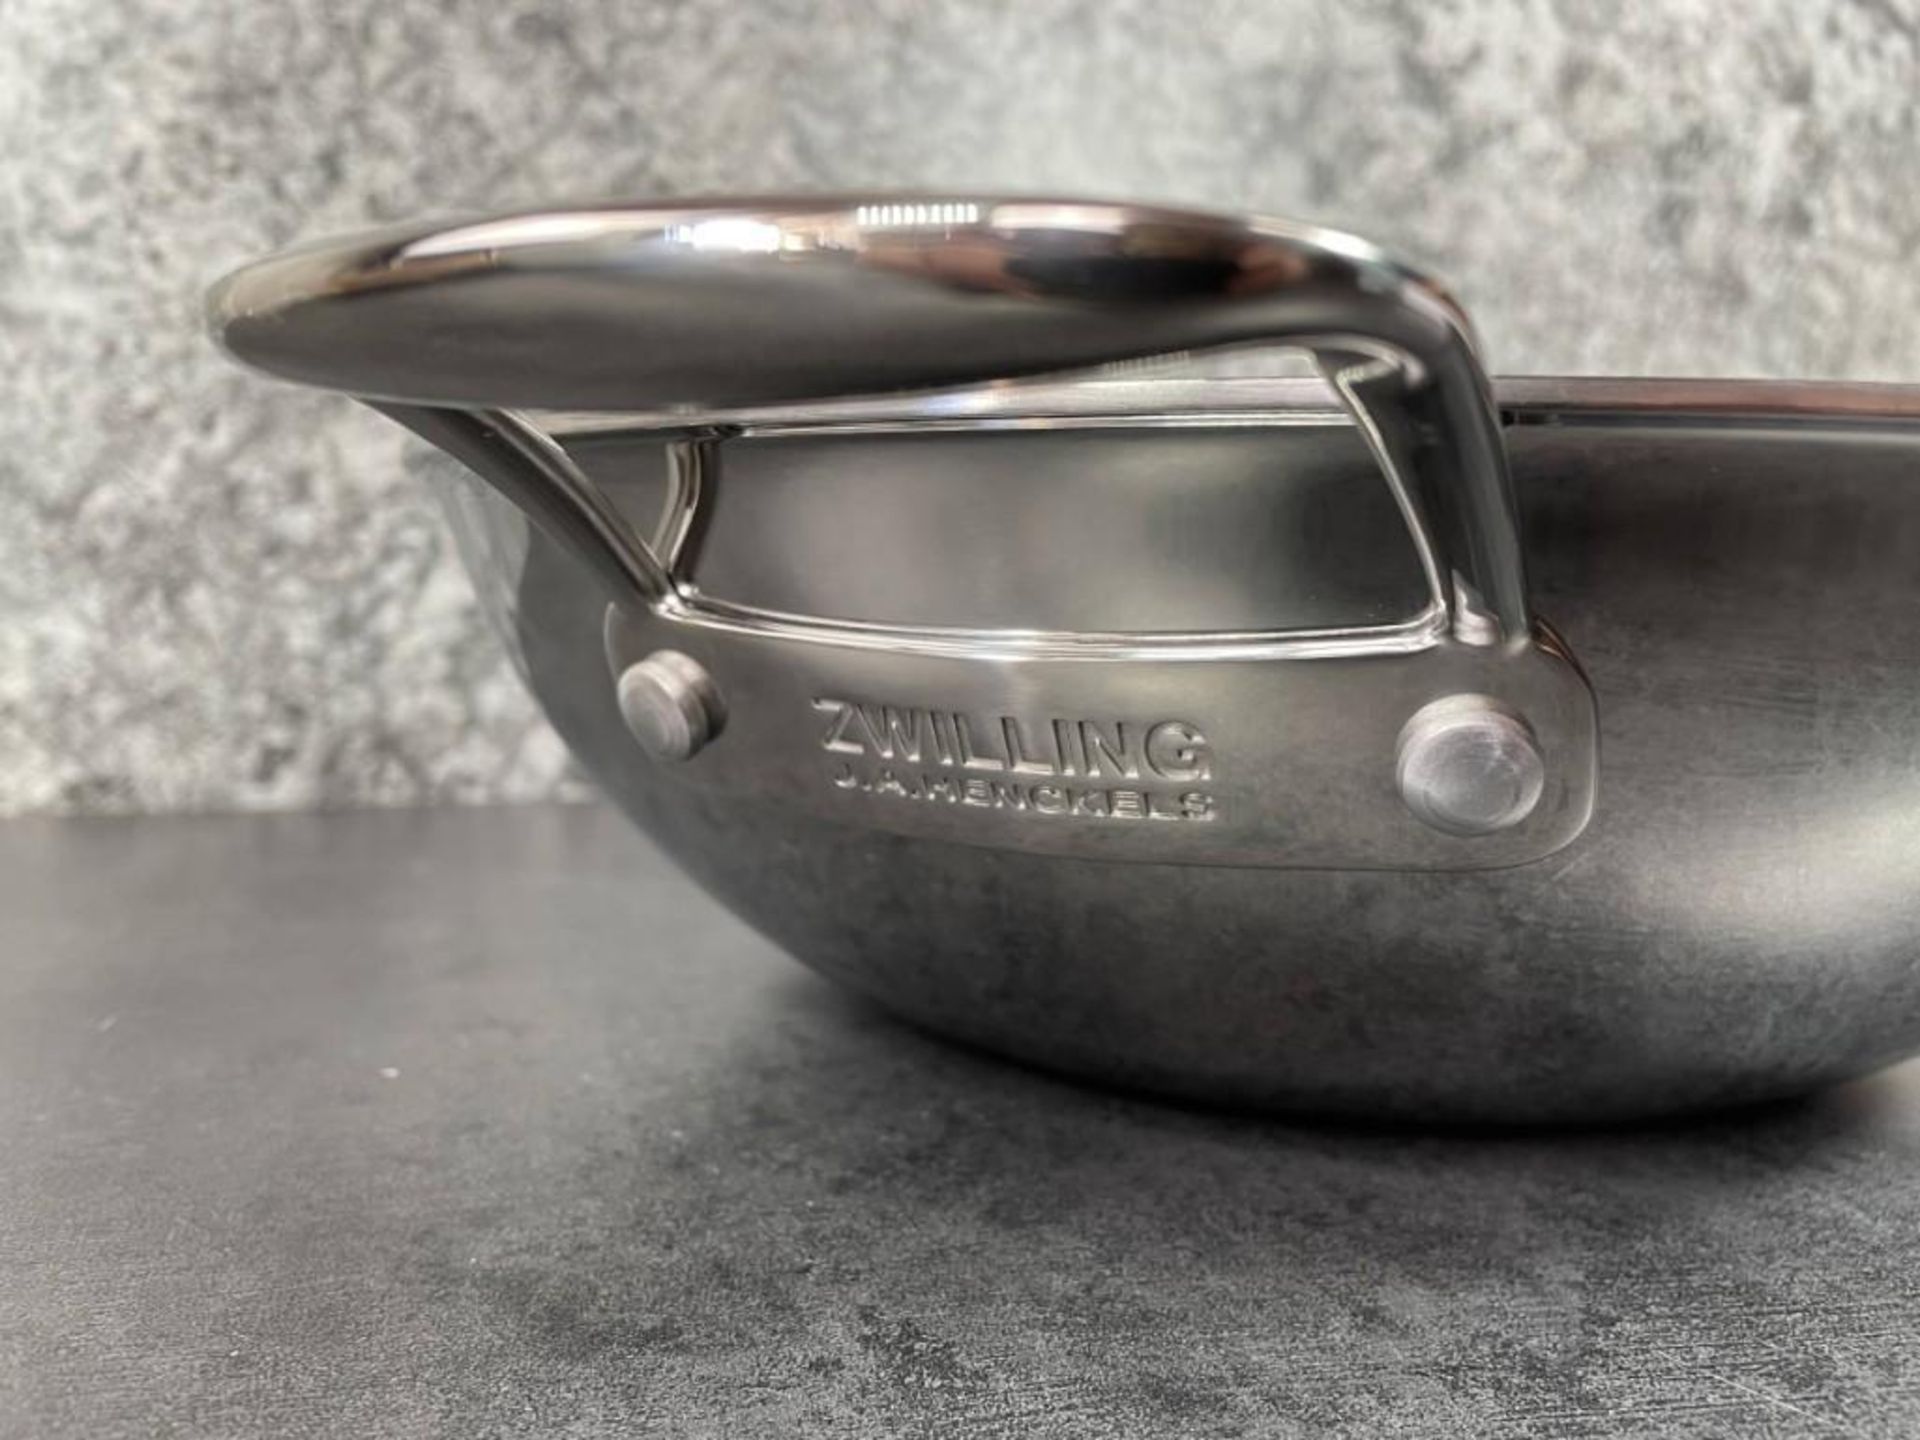 ZWILLING COMMERCIAL STAINLESS 12" NON-STICK WOK - Image 6 of 8